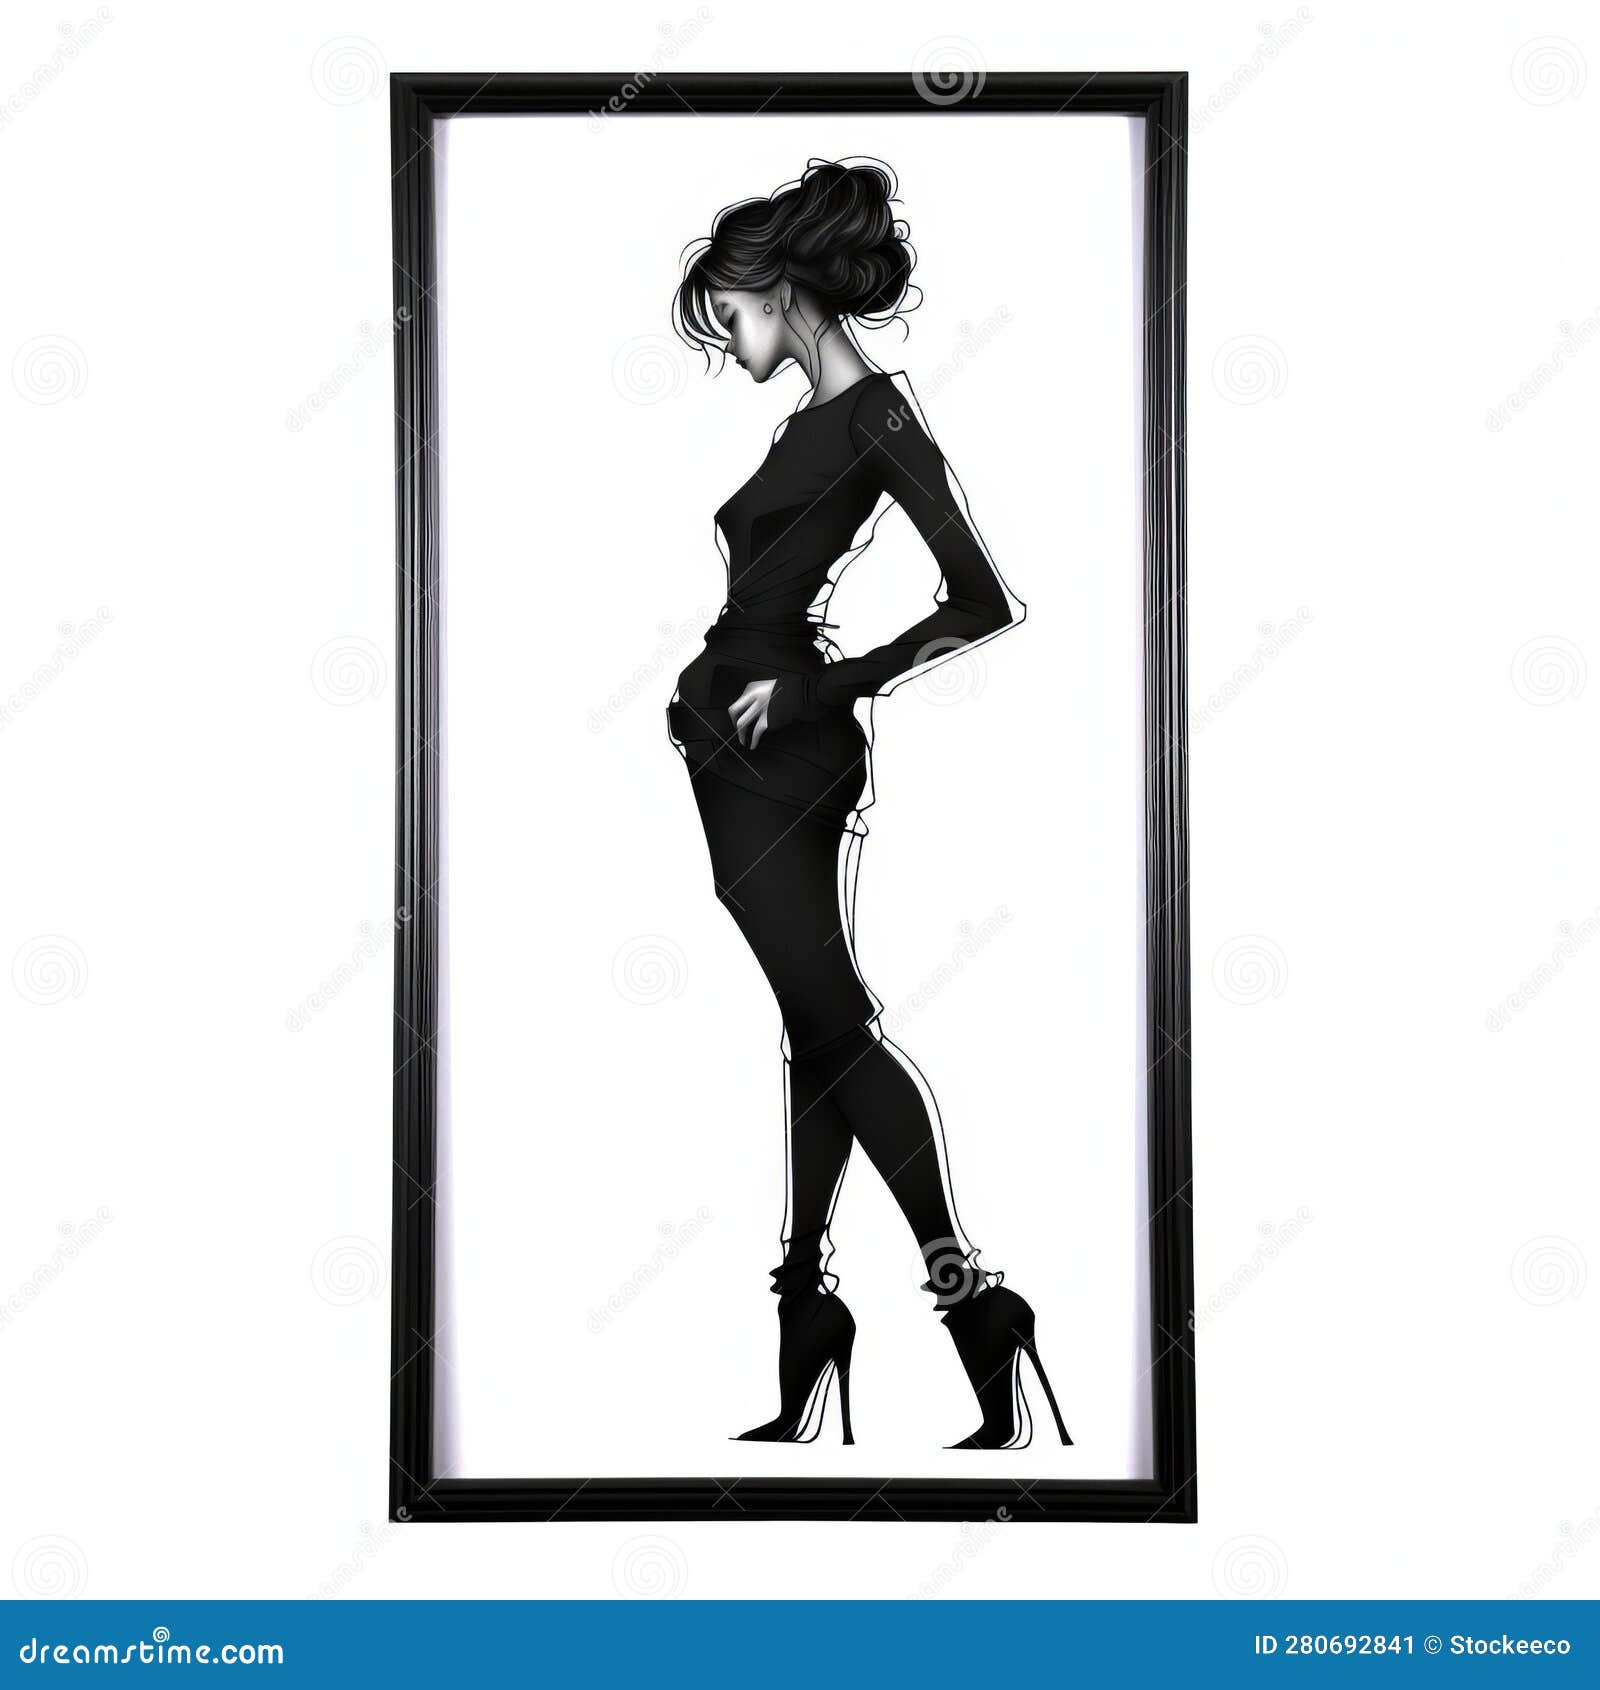 sleek and stylized black frame featuring girl in high heels